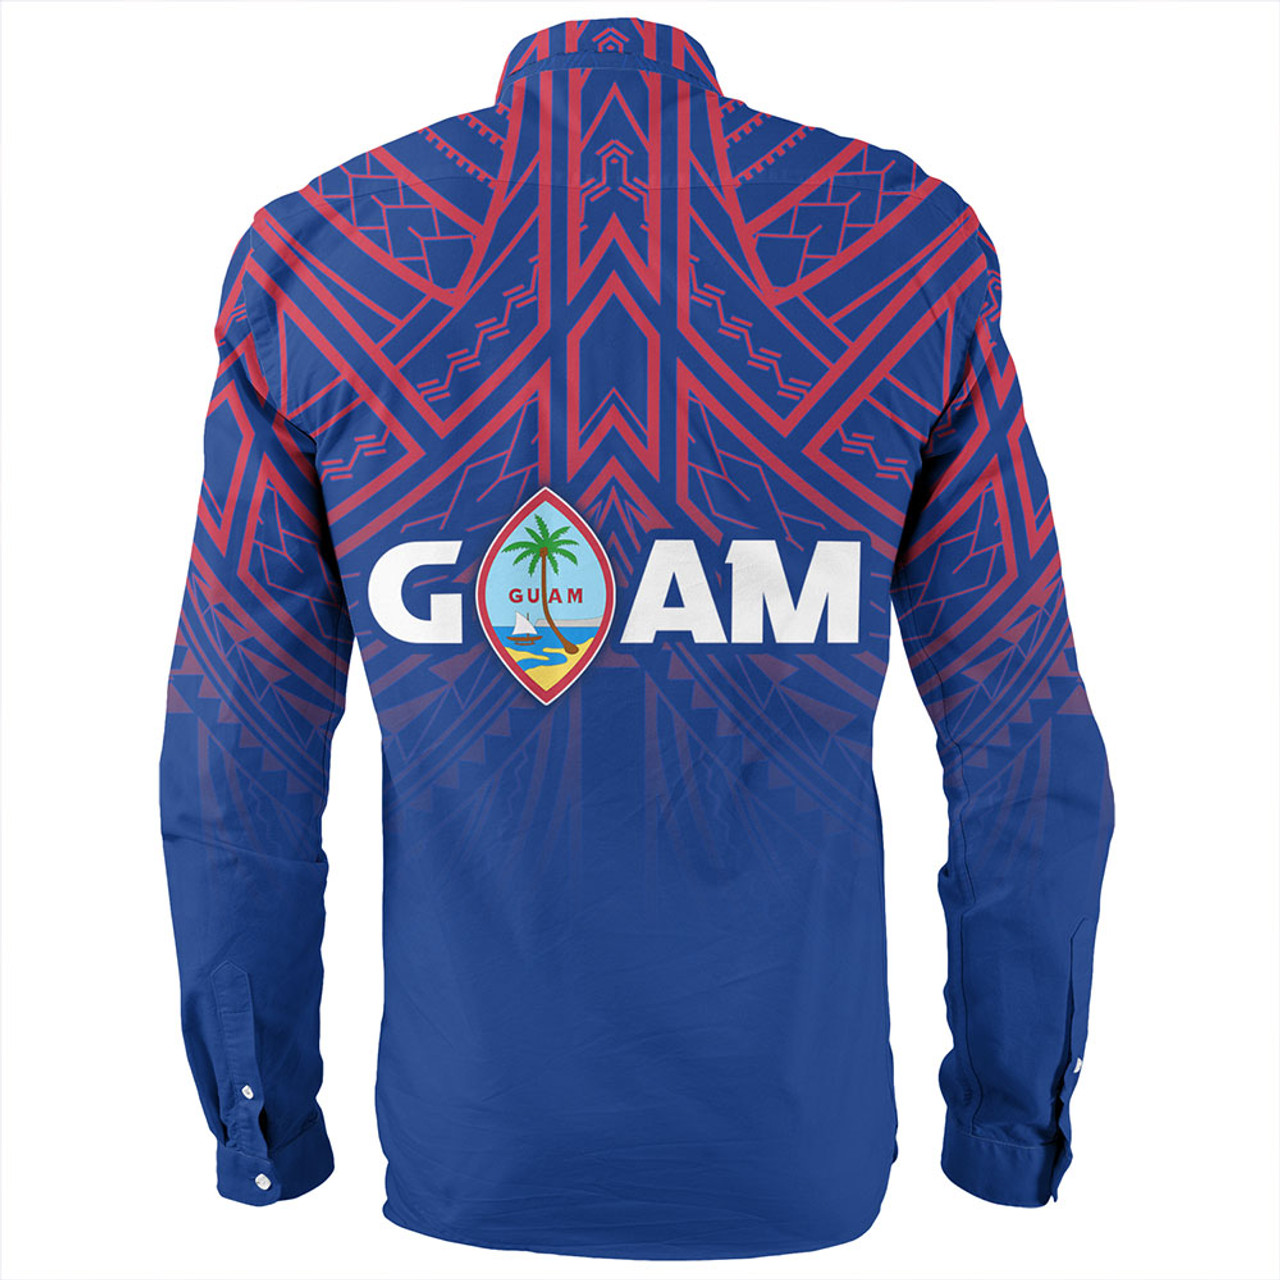 Guam Long Sleeve Shirt - Flag Color With Traditional Patterns